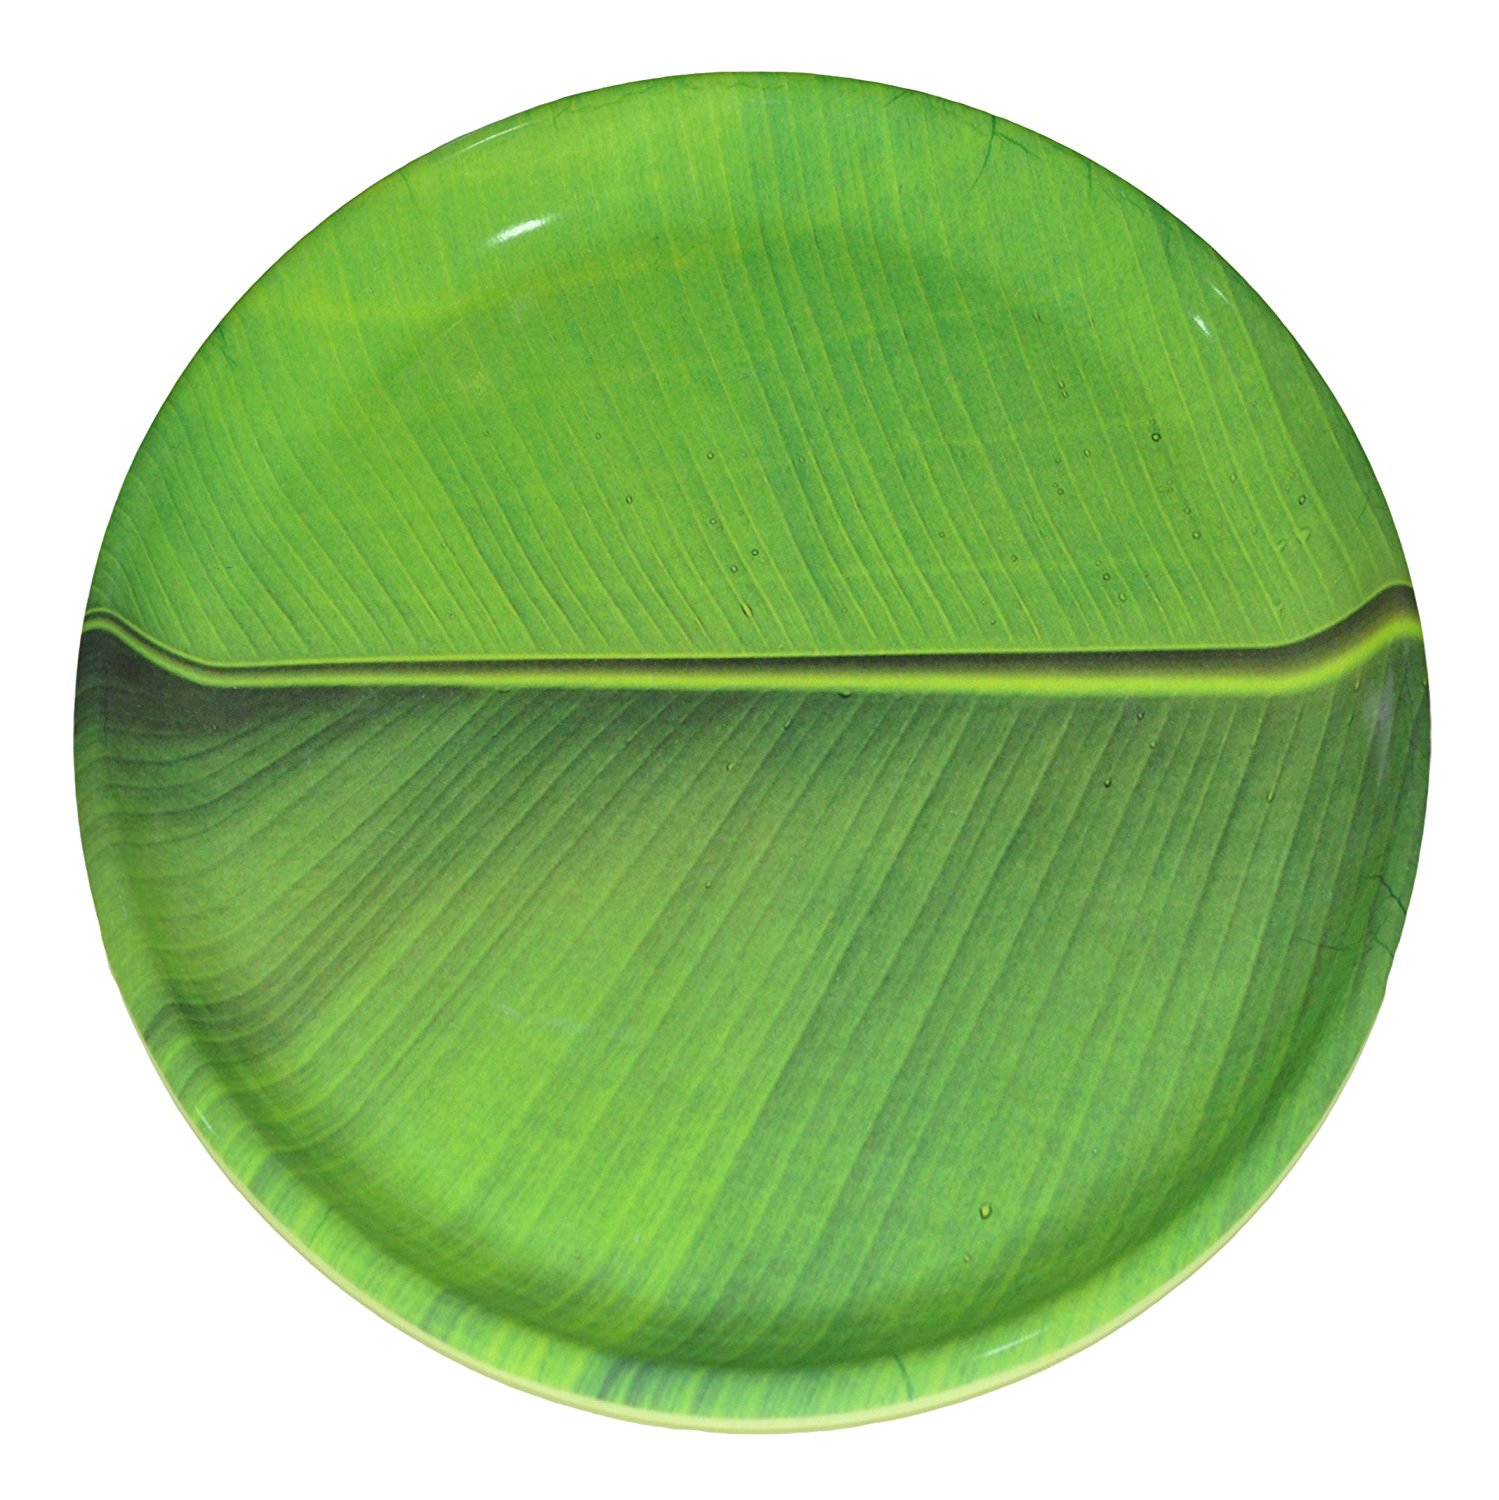 Buy Hua You 12 inch Banana Leaf South Indian Round Dinner Lunch ...